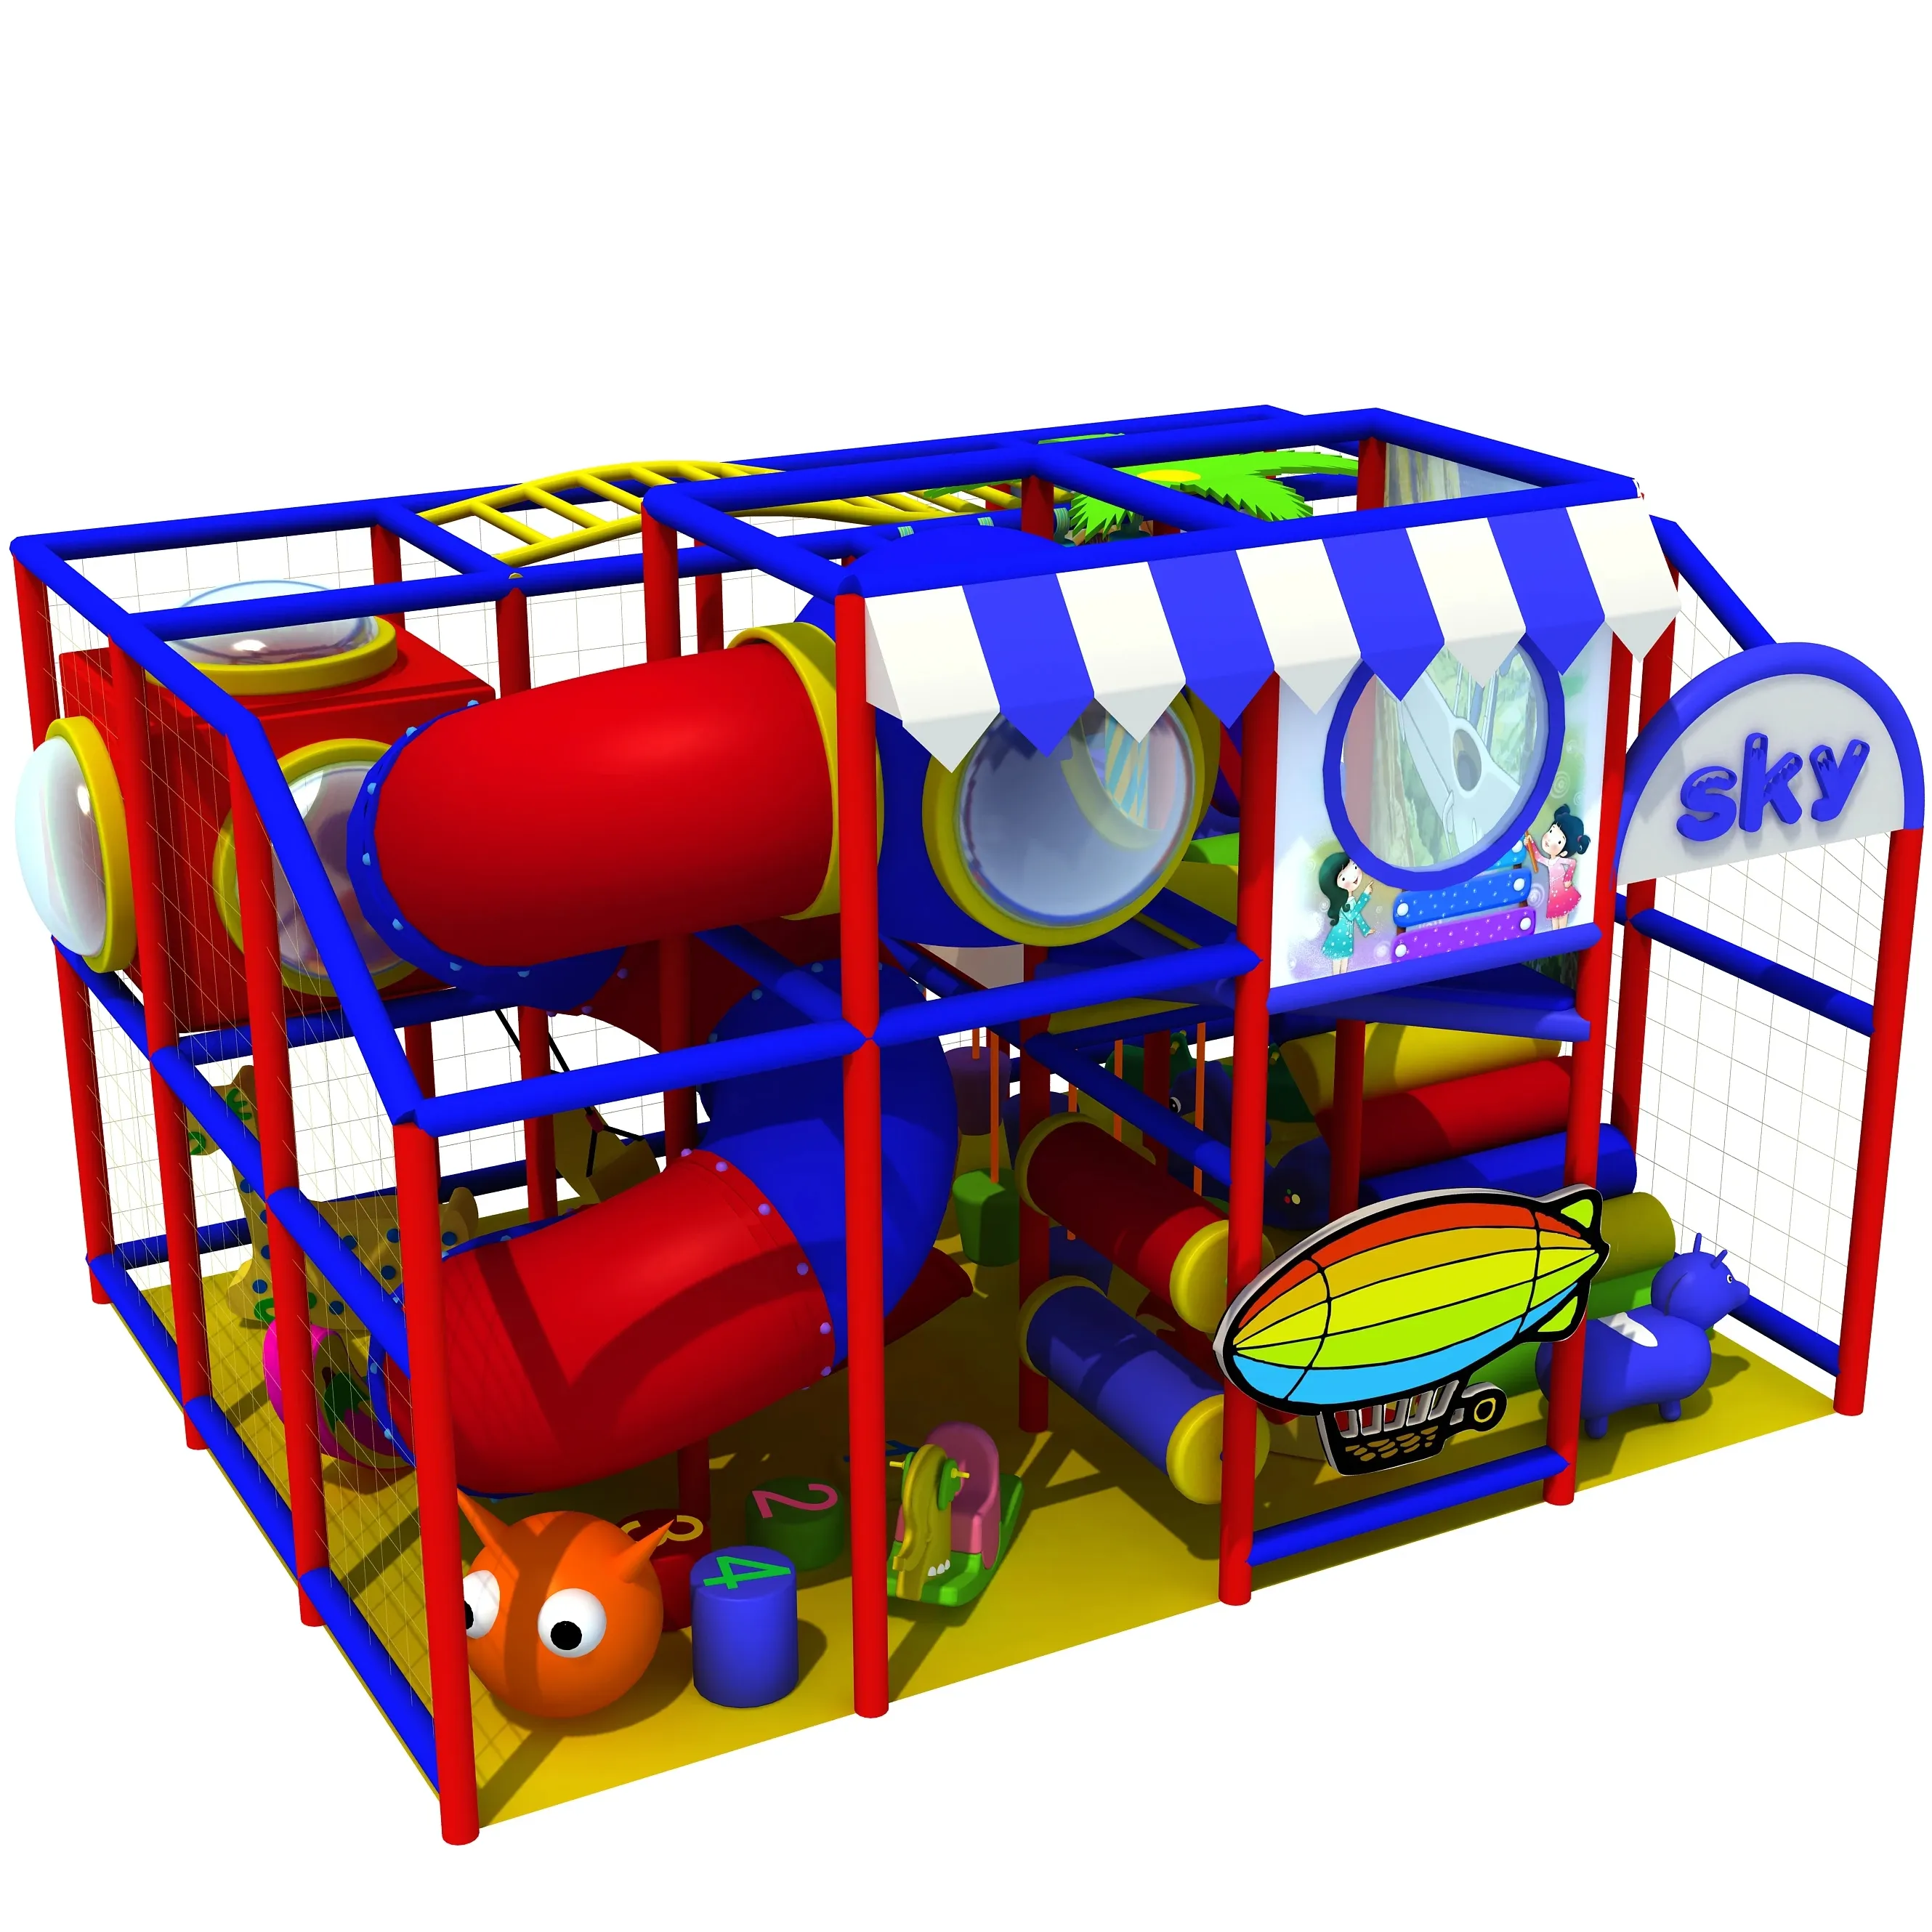 Swing Playground Children Funny Indoor School For Sale Innovative Commercial Ball Pool Slide Toy Car Hot Small Cheap